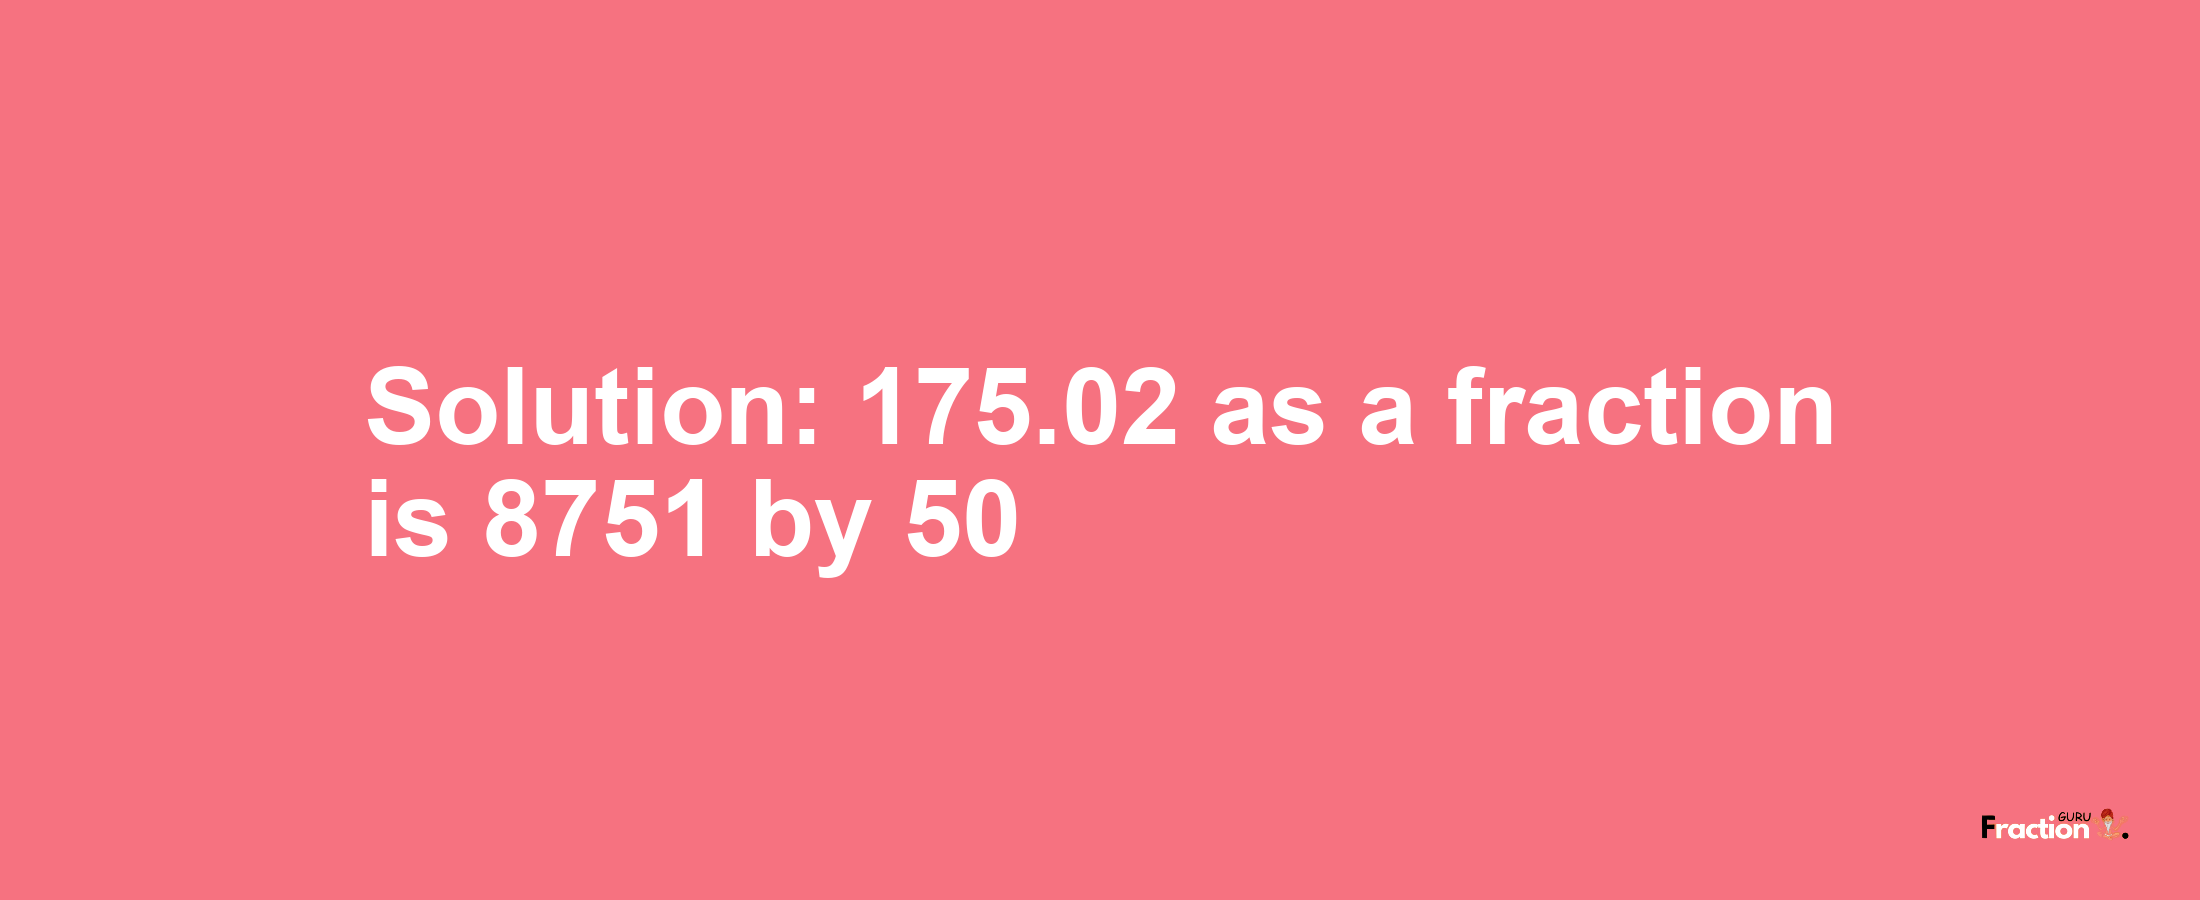 Solution:175.02 as a fraction is 8751/50